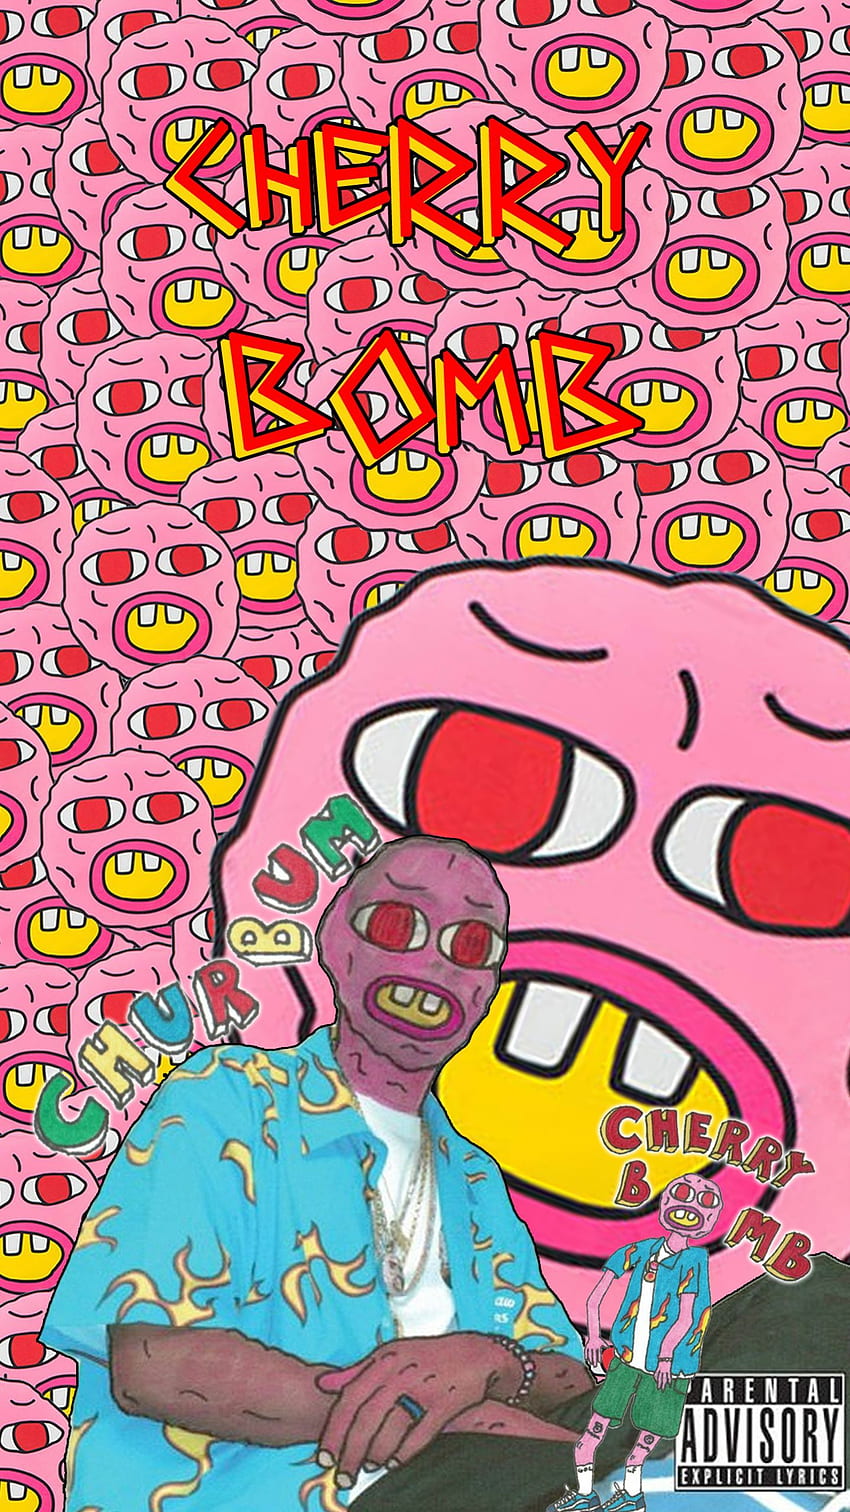 I made a Cherry Bomb background for my phone, hope you enjoy HD phone wallpaper